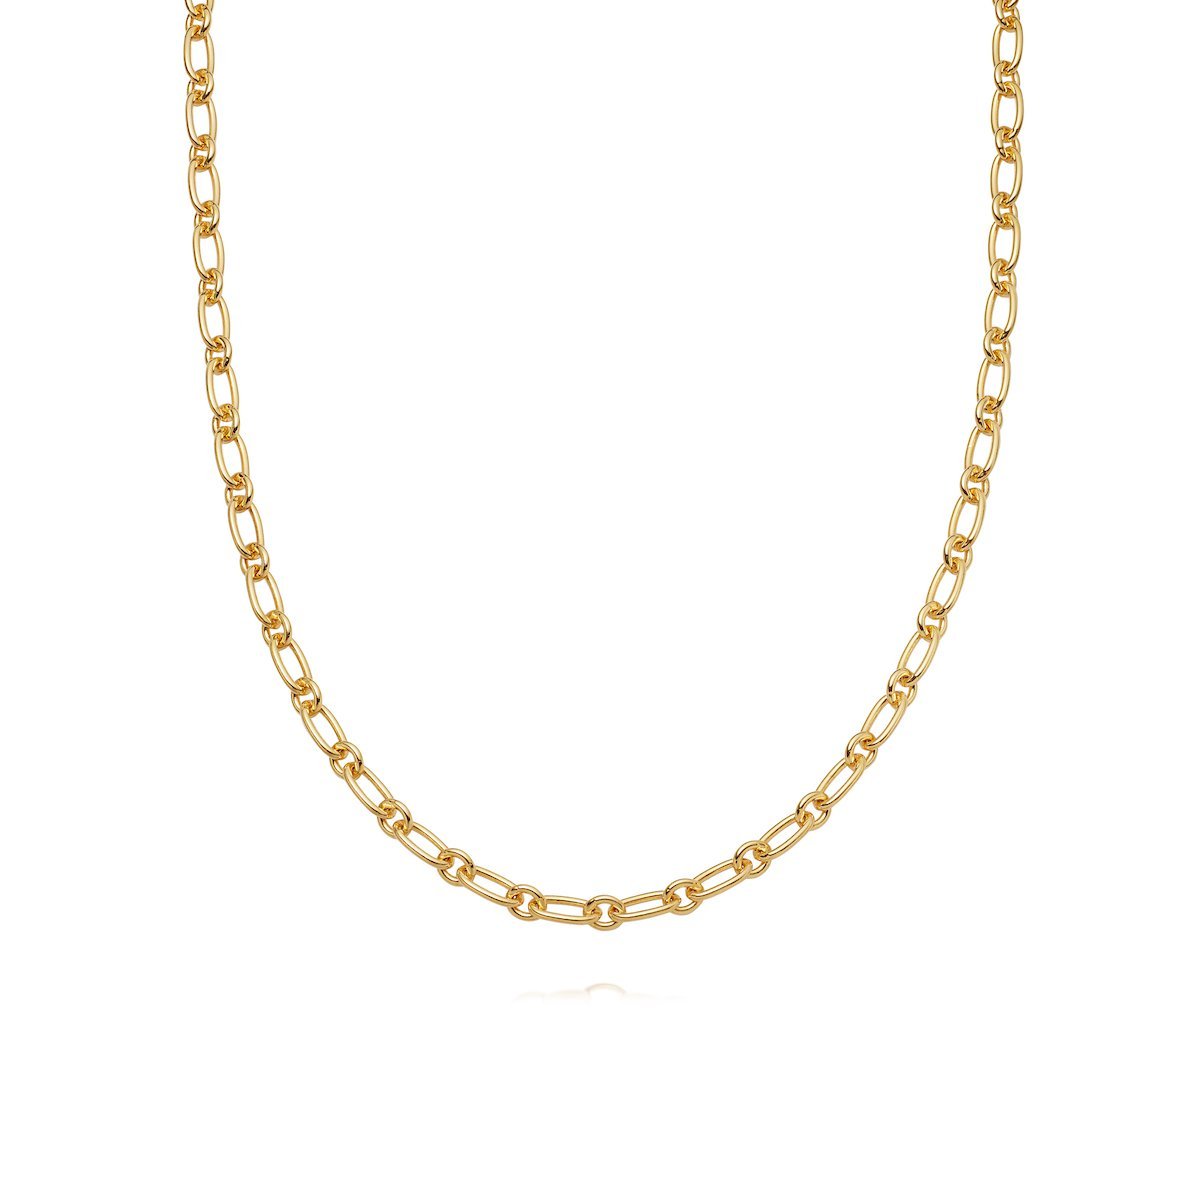 STACKED LINKED CHAIN NECKLACE - 18 CT GOLD PLATE